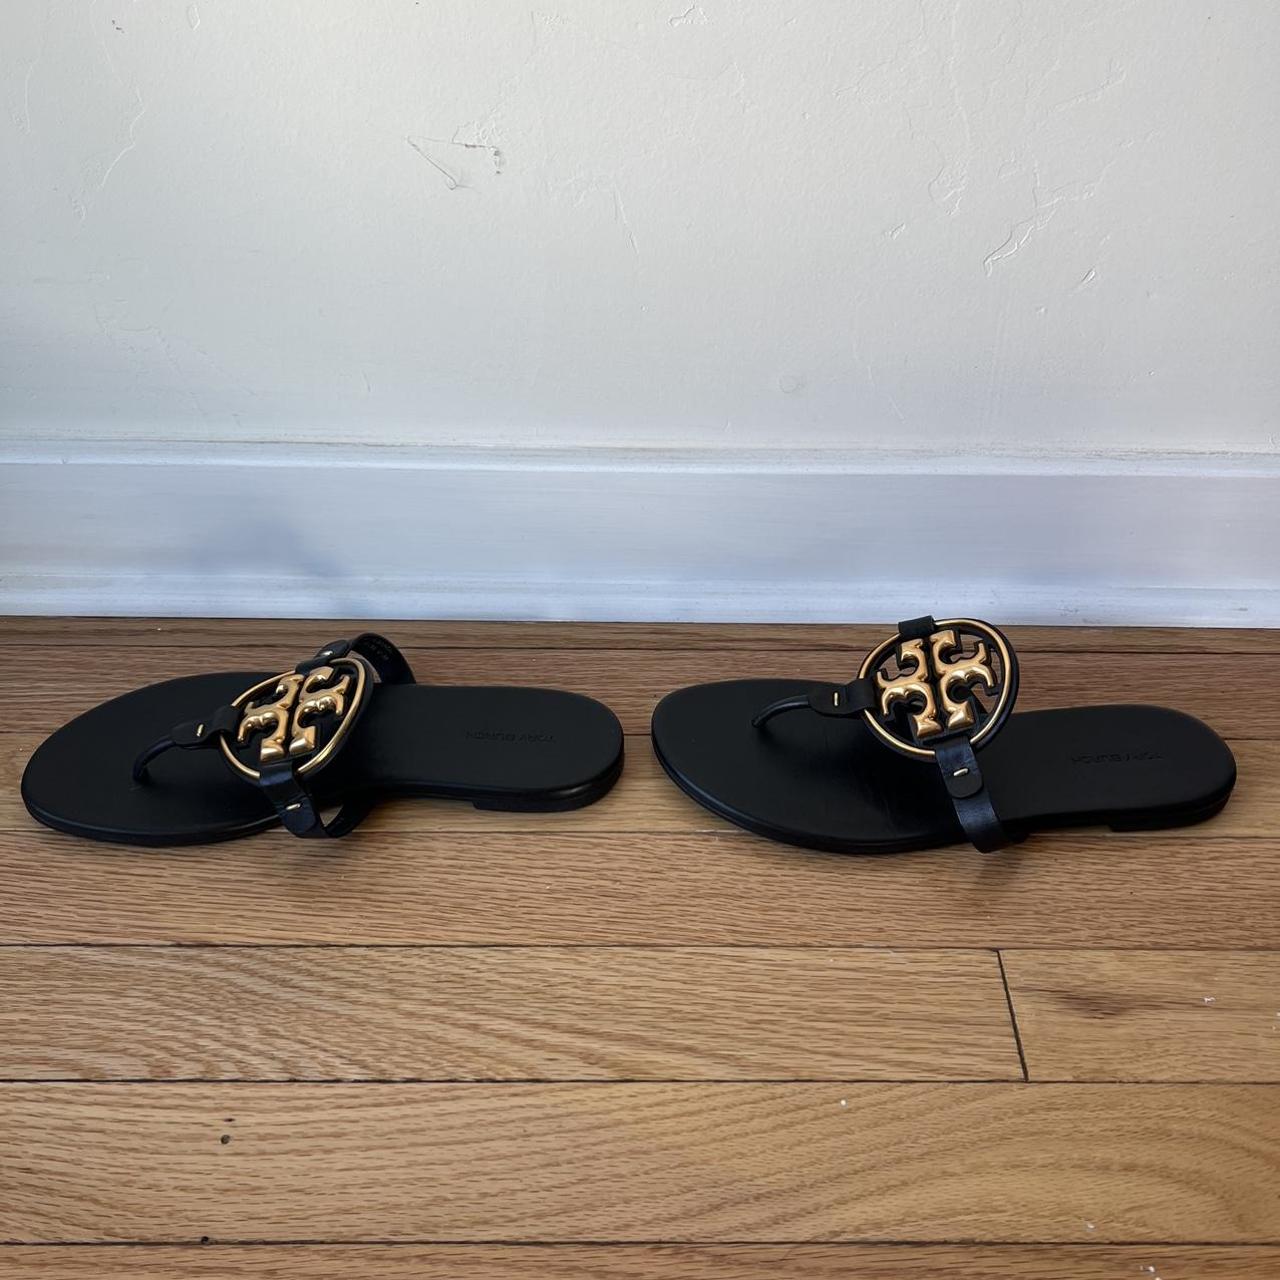 Tory Burch Perfect Black Metal Miller Sandals 8 US at FORZIERI